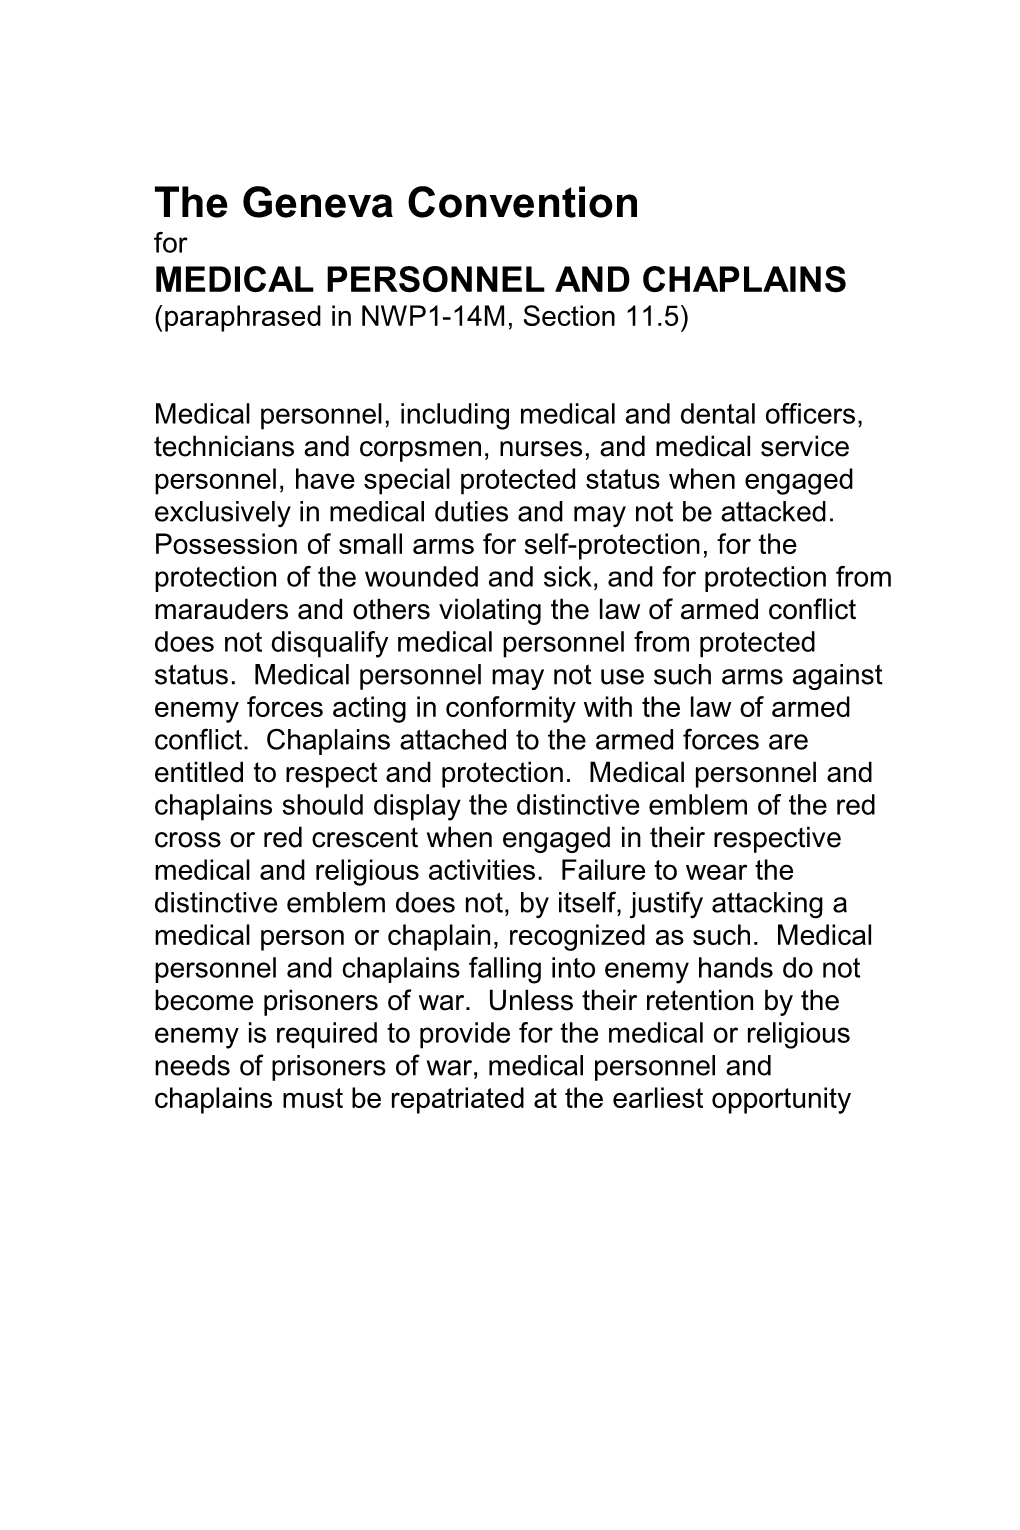 Medical Personnel and Chaplains